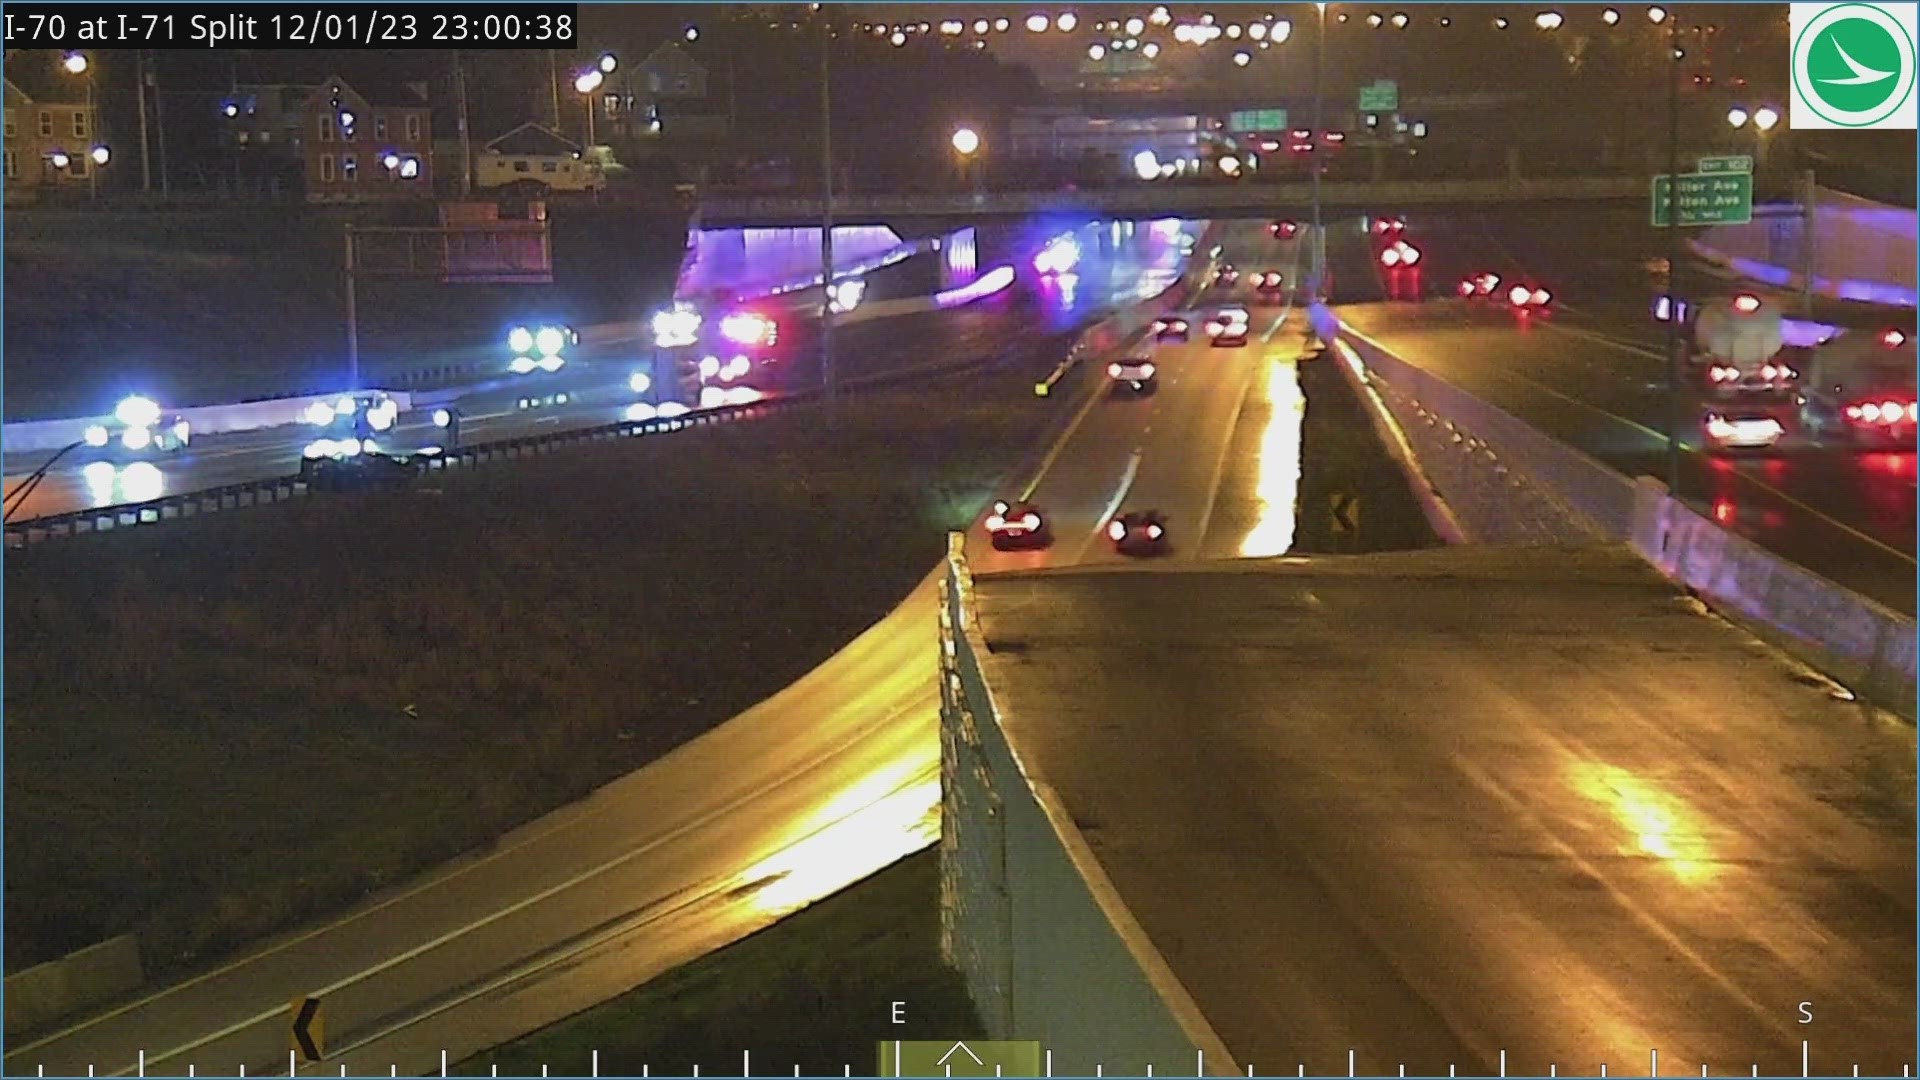 Police said the crash happened on I-70 West at I-71 North near Broad Street just after 10:05 p.m.